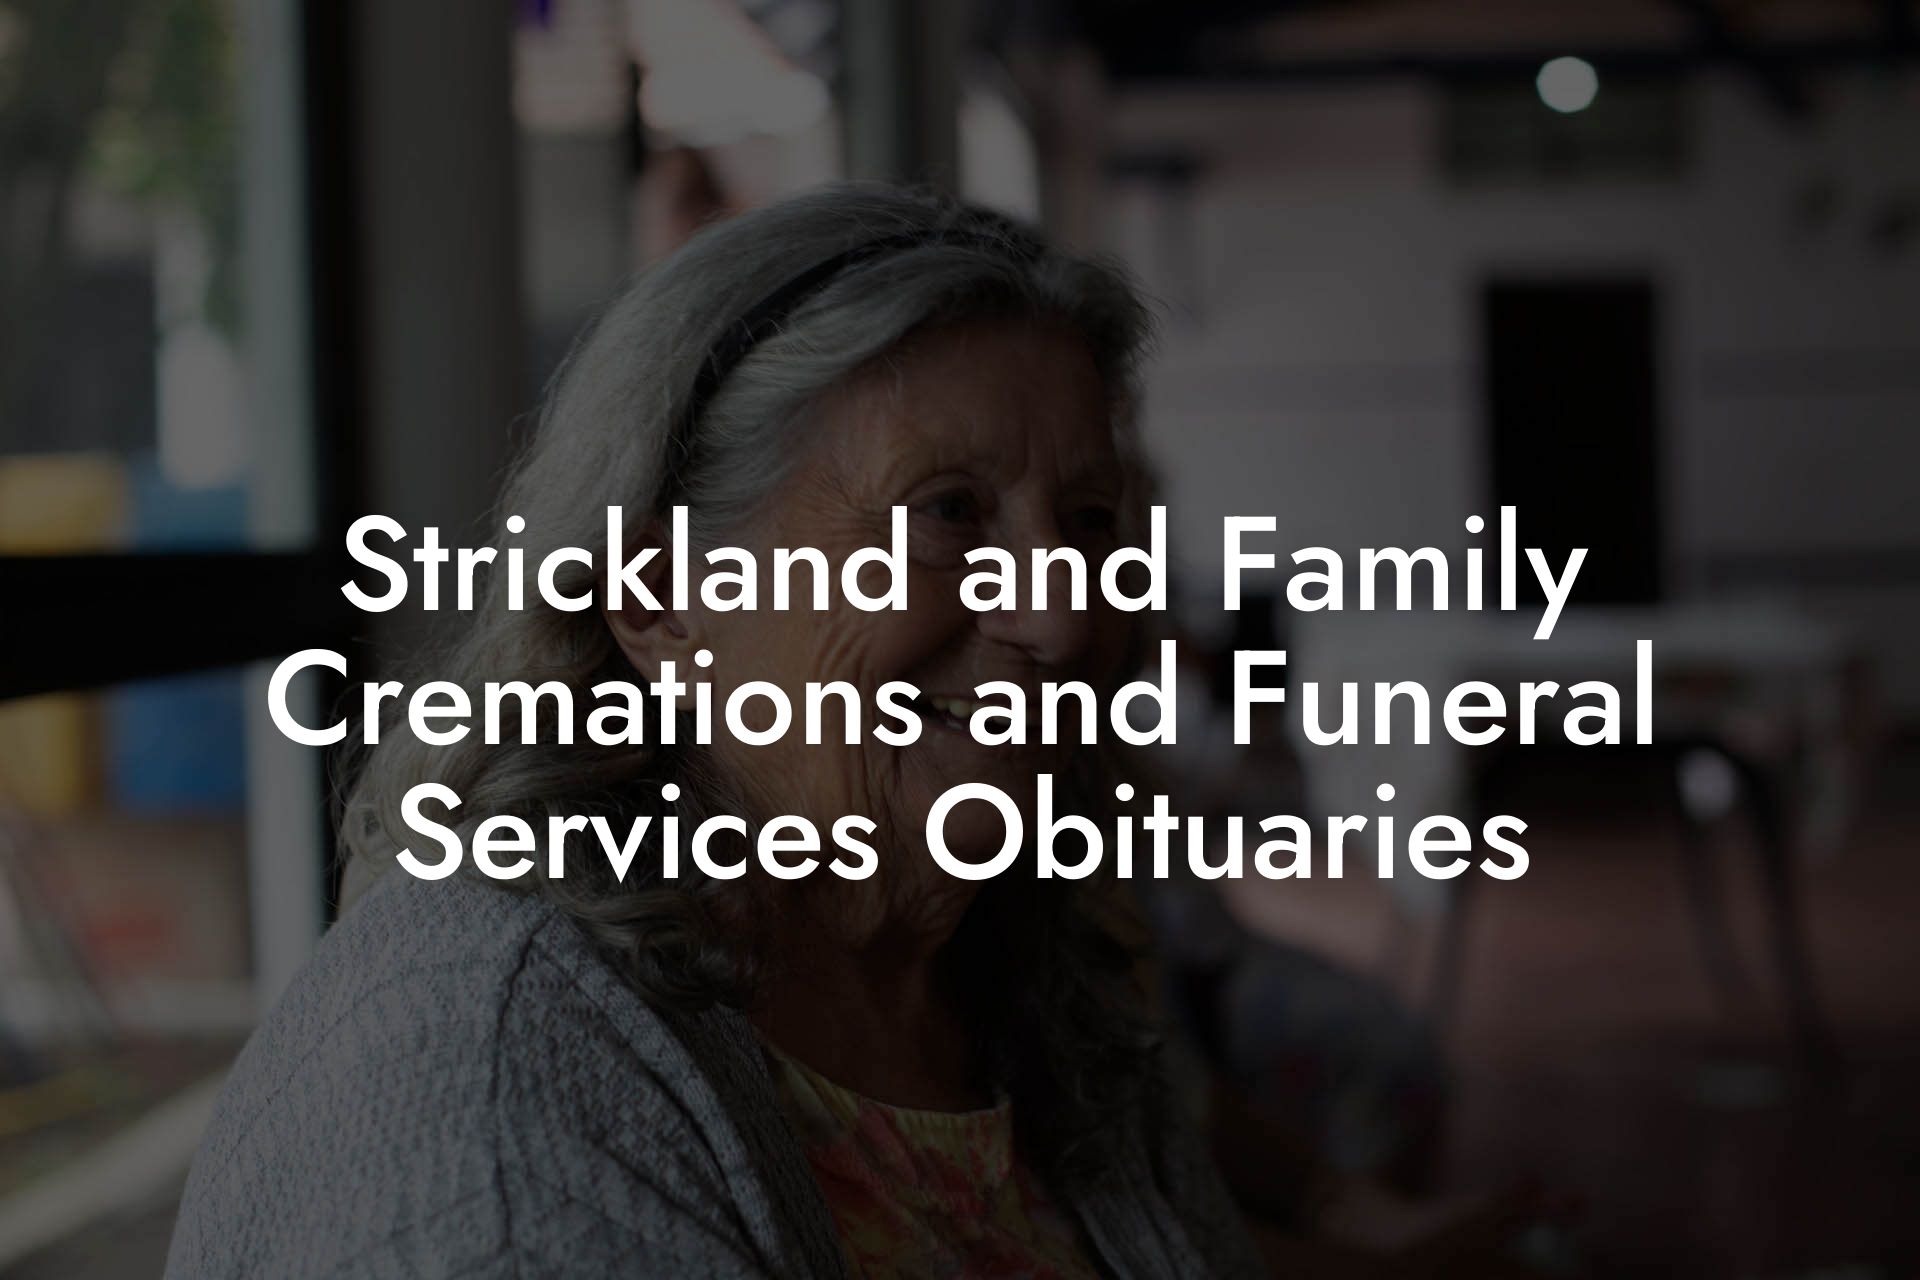 Strickland and Family Cremations and Funeral Services Obituaries